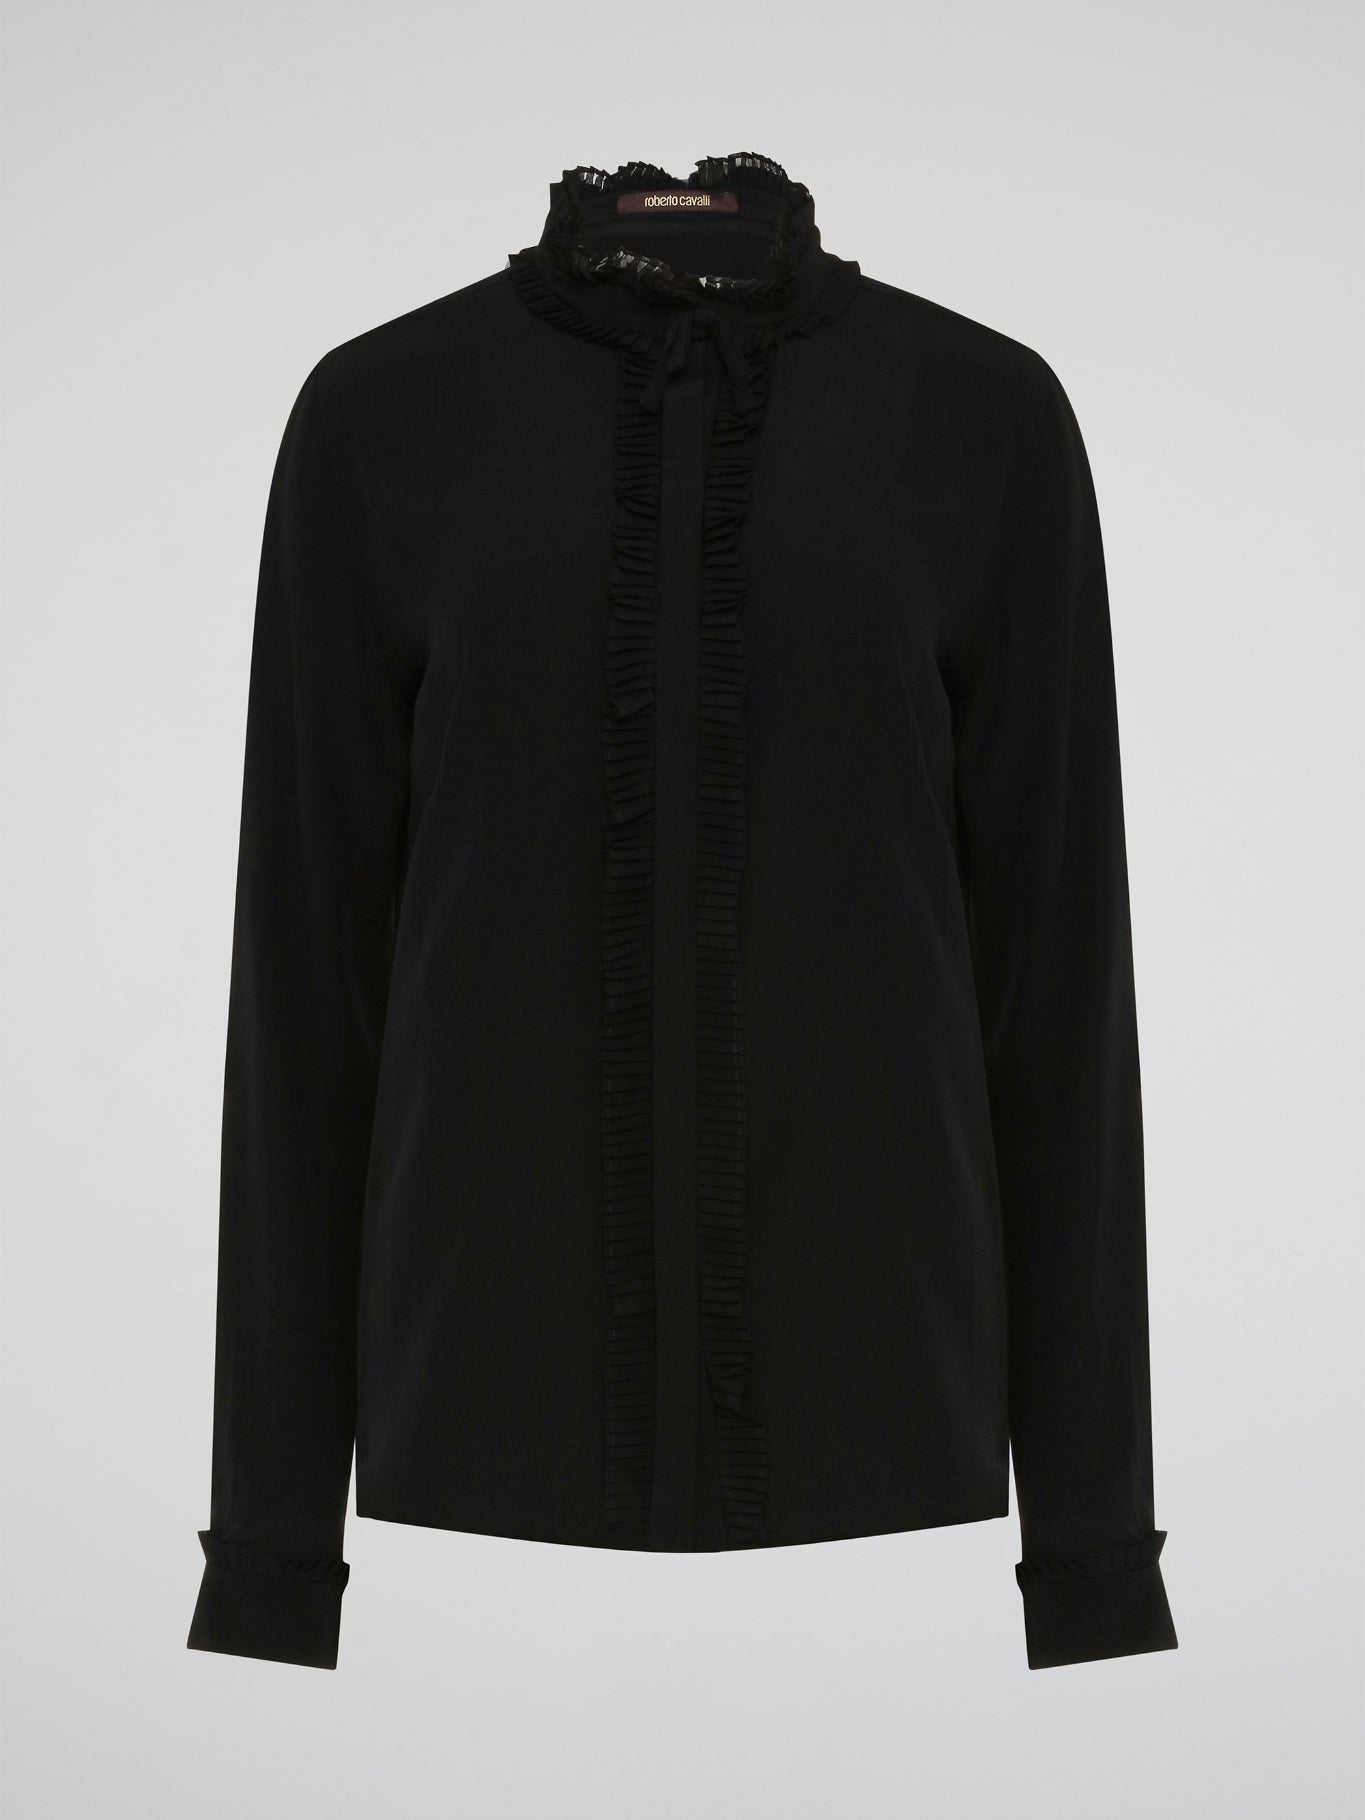 Step into the world of high fashion with this Roberto Cavalli Black Frill Detailed Blouse. The flowing silhouette is accentuated by intricate frill detailing, adding a touch of drama and elegance to any outfit. Whether paired with jeans for a casual chic look or with a skirt for a night out, this blouse is sure to turn heads wherever you go.